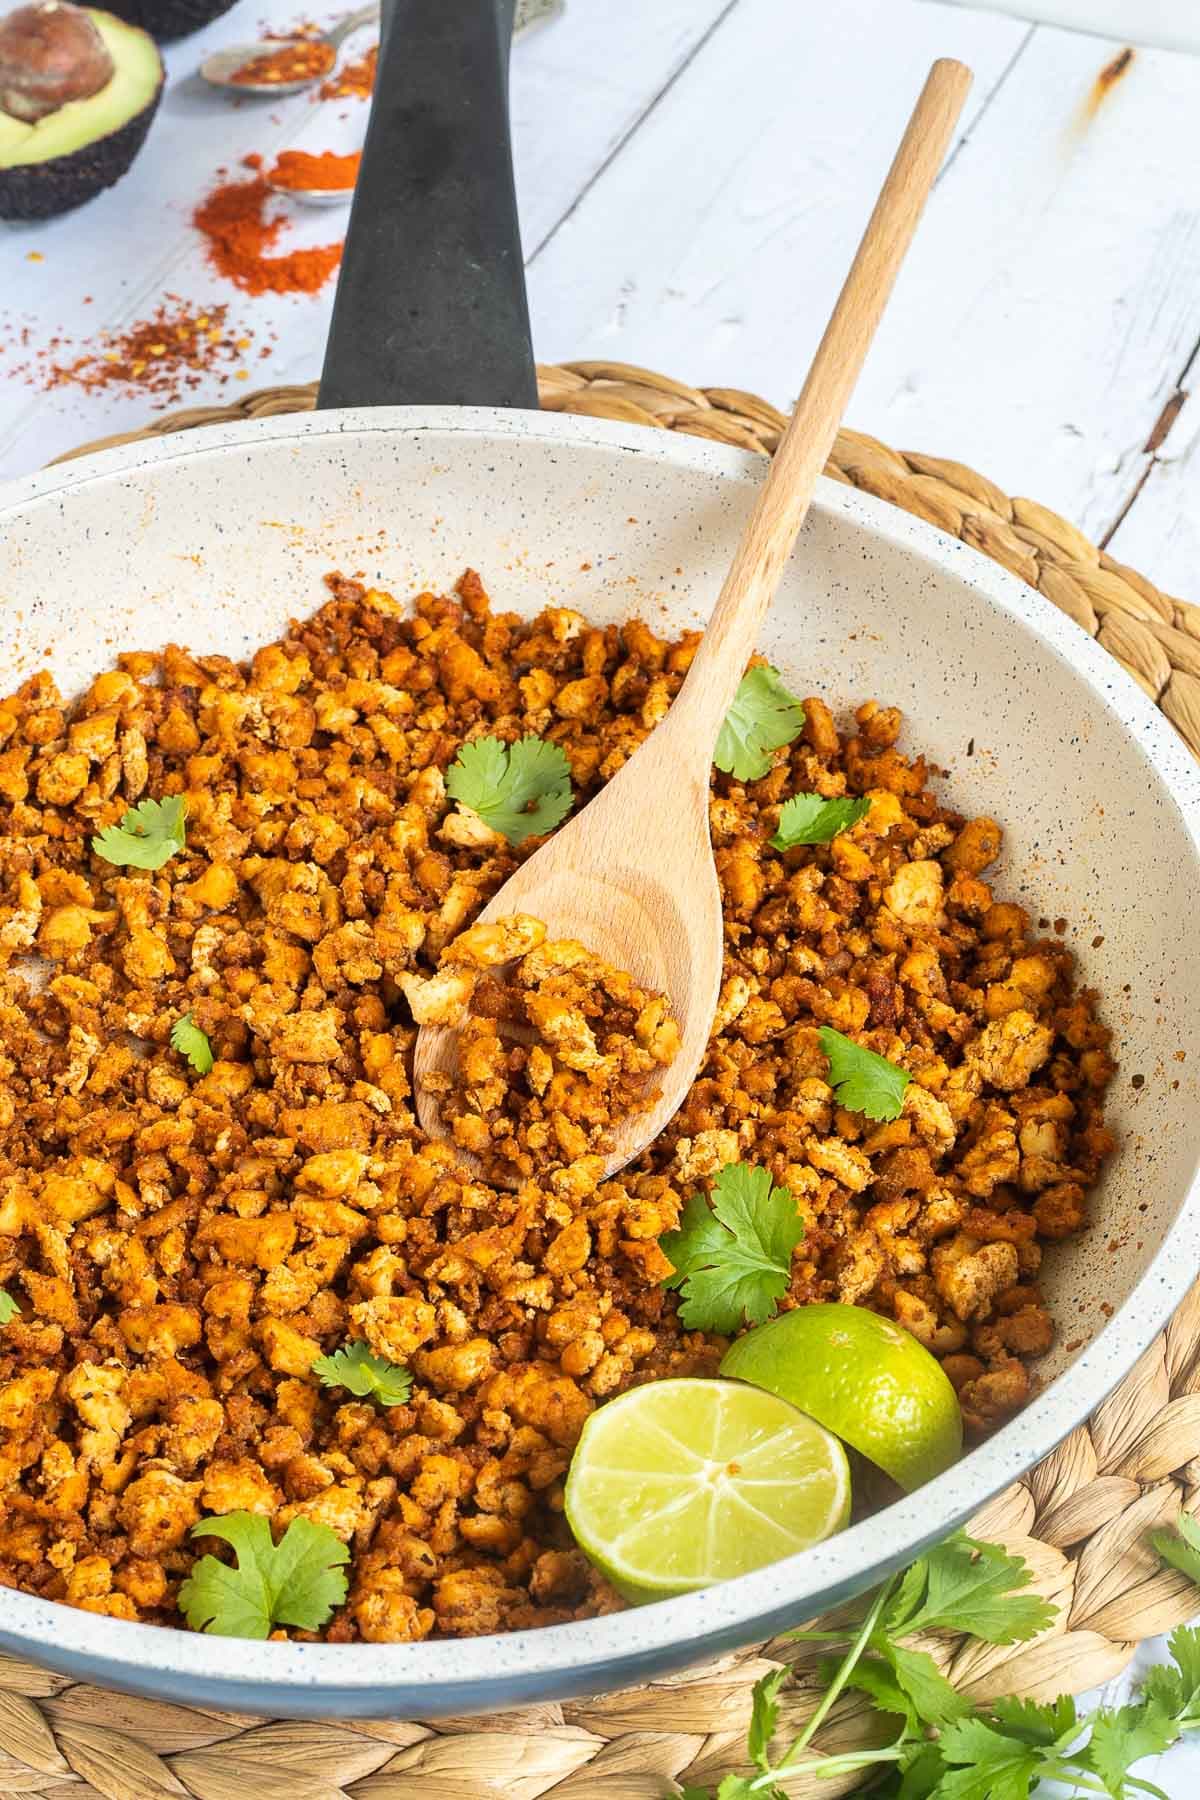 A white frying pan with brown crispy tofu crumbles sprinkled with freshly chopped cilantro. Lime slices and a wooden spatula are added. Avocado and more spices are next to the pan.